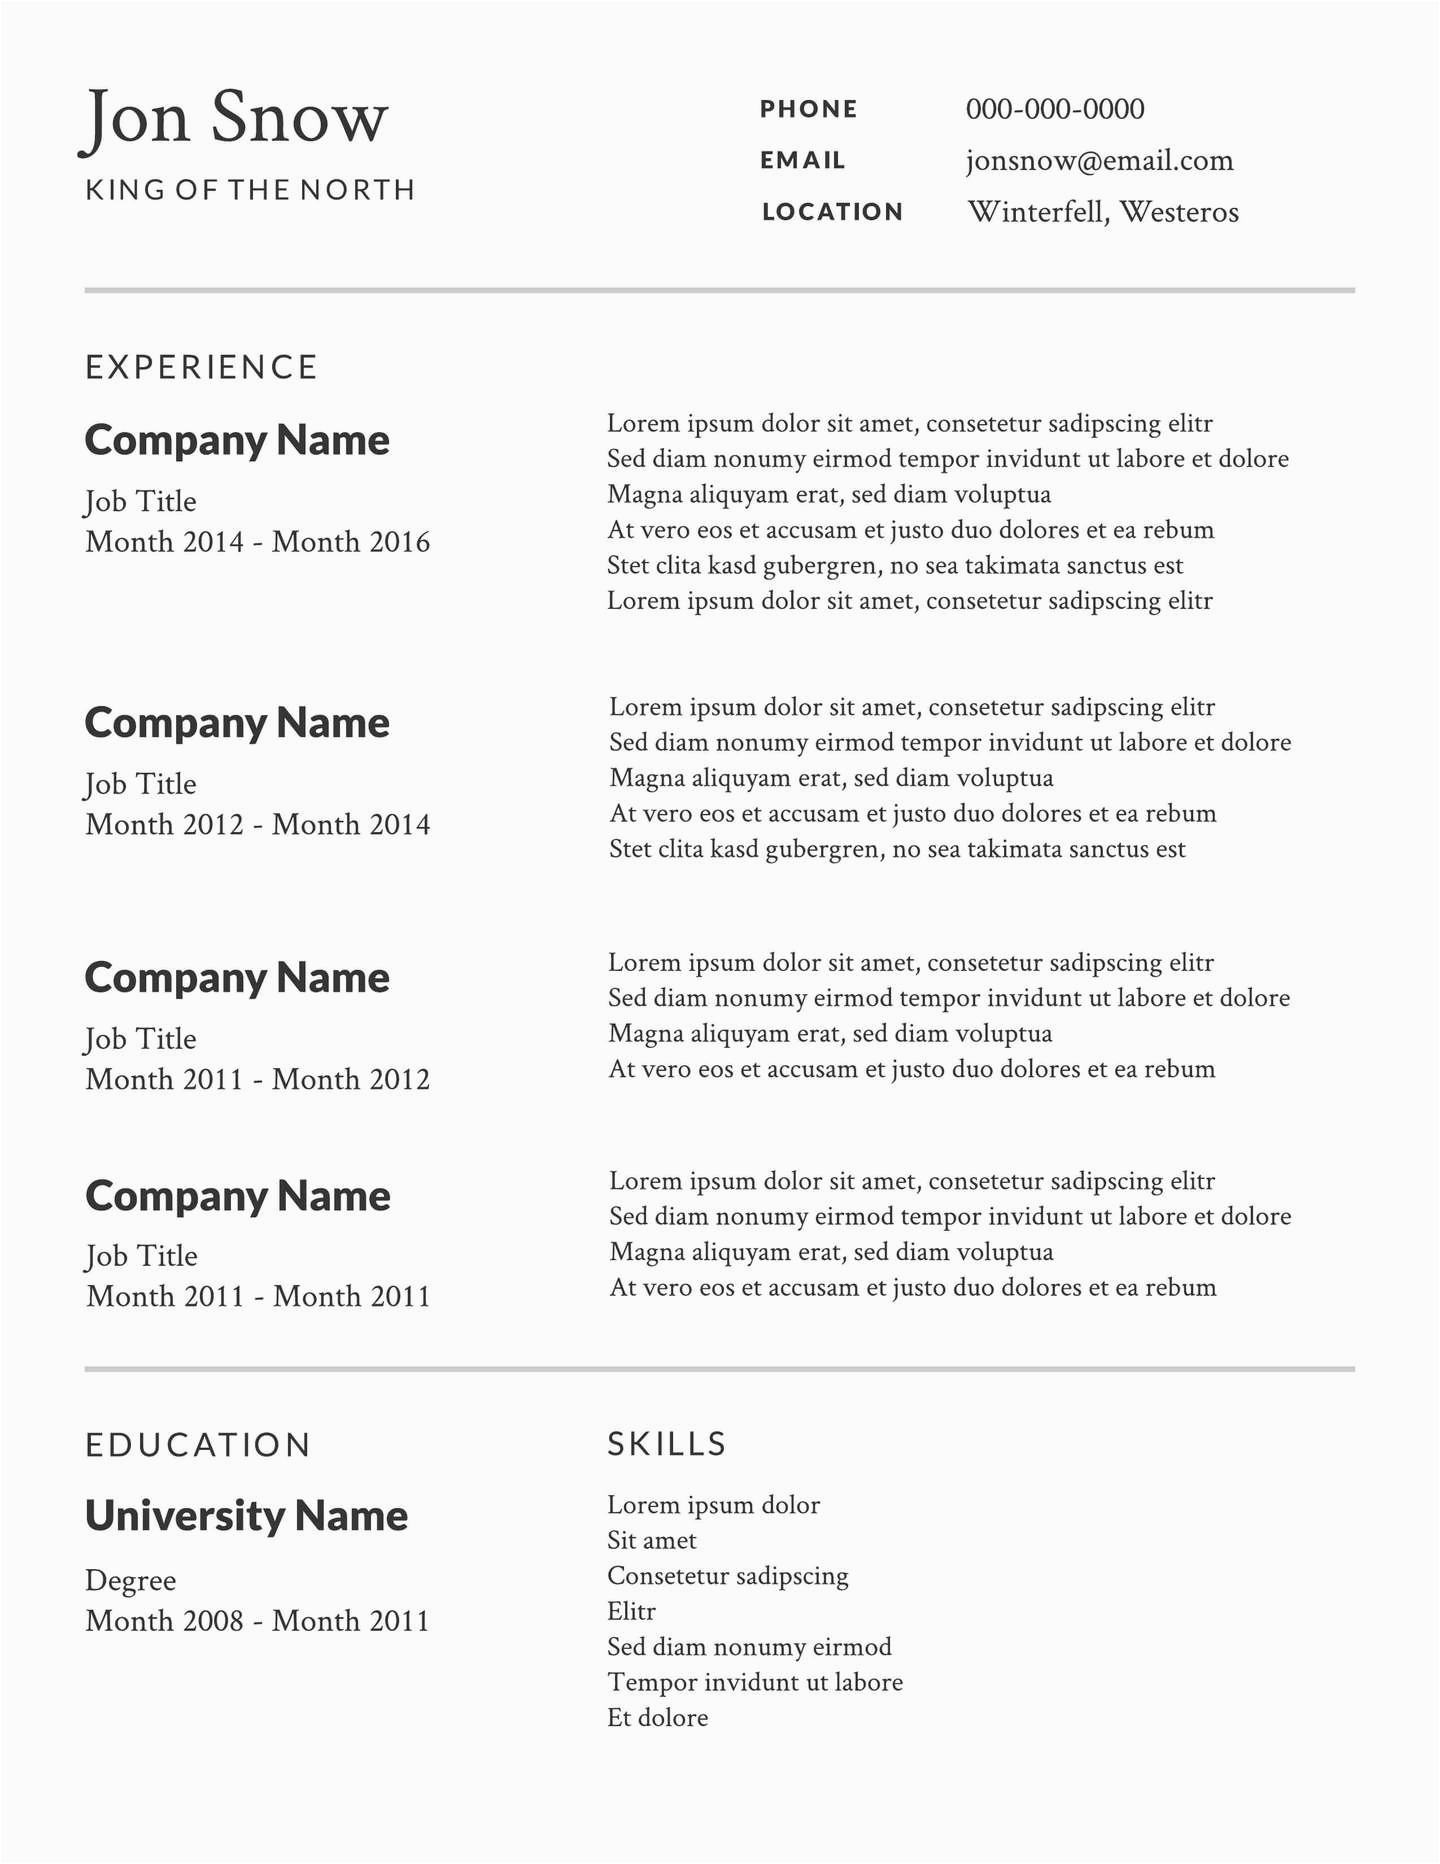 Free Resume Templates Online to Print 2 Free Resume Templates & Examples Lucidpress